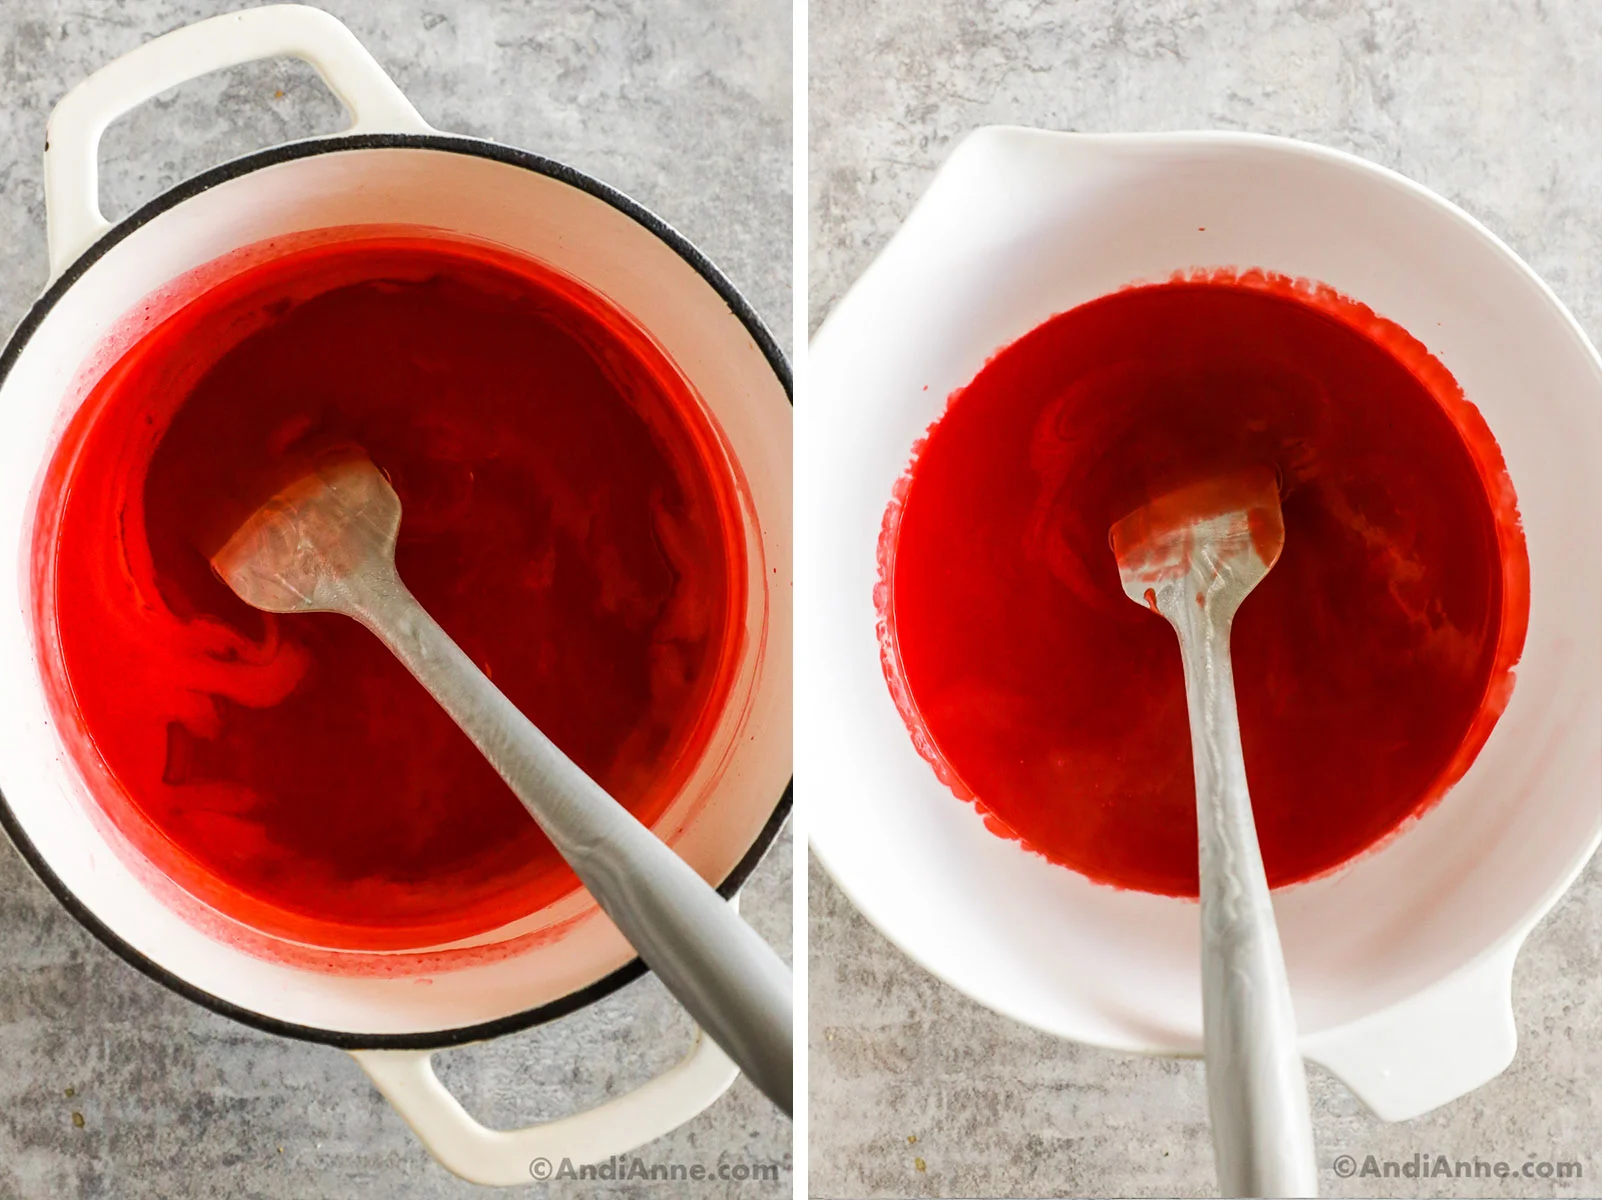 Hot red liquid made from jello and pudding mix in a bowl.